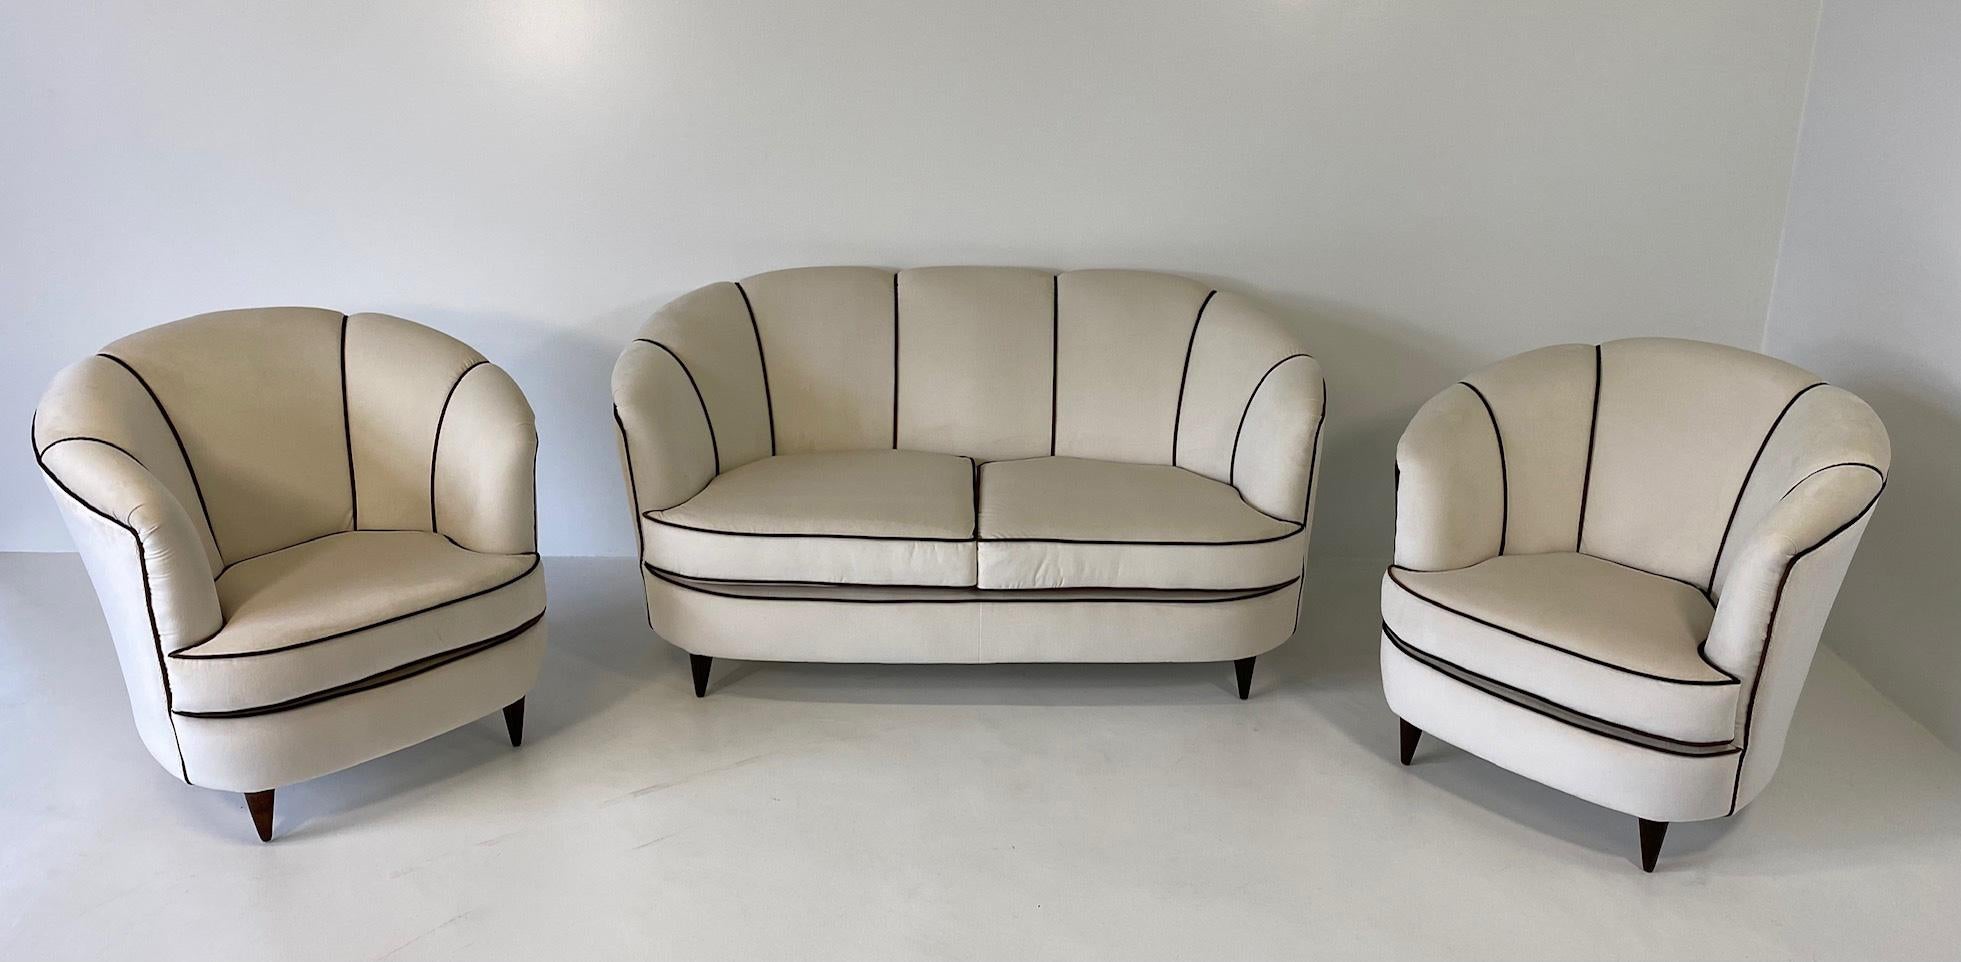 This Art Deco set is composed by a pair of armchairs and a sofa and it was produced in Italy in the 1940s.

It has been completely restored and reupholstered with and elegant beige velvet and a profile made of brown